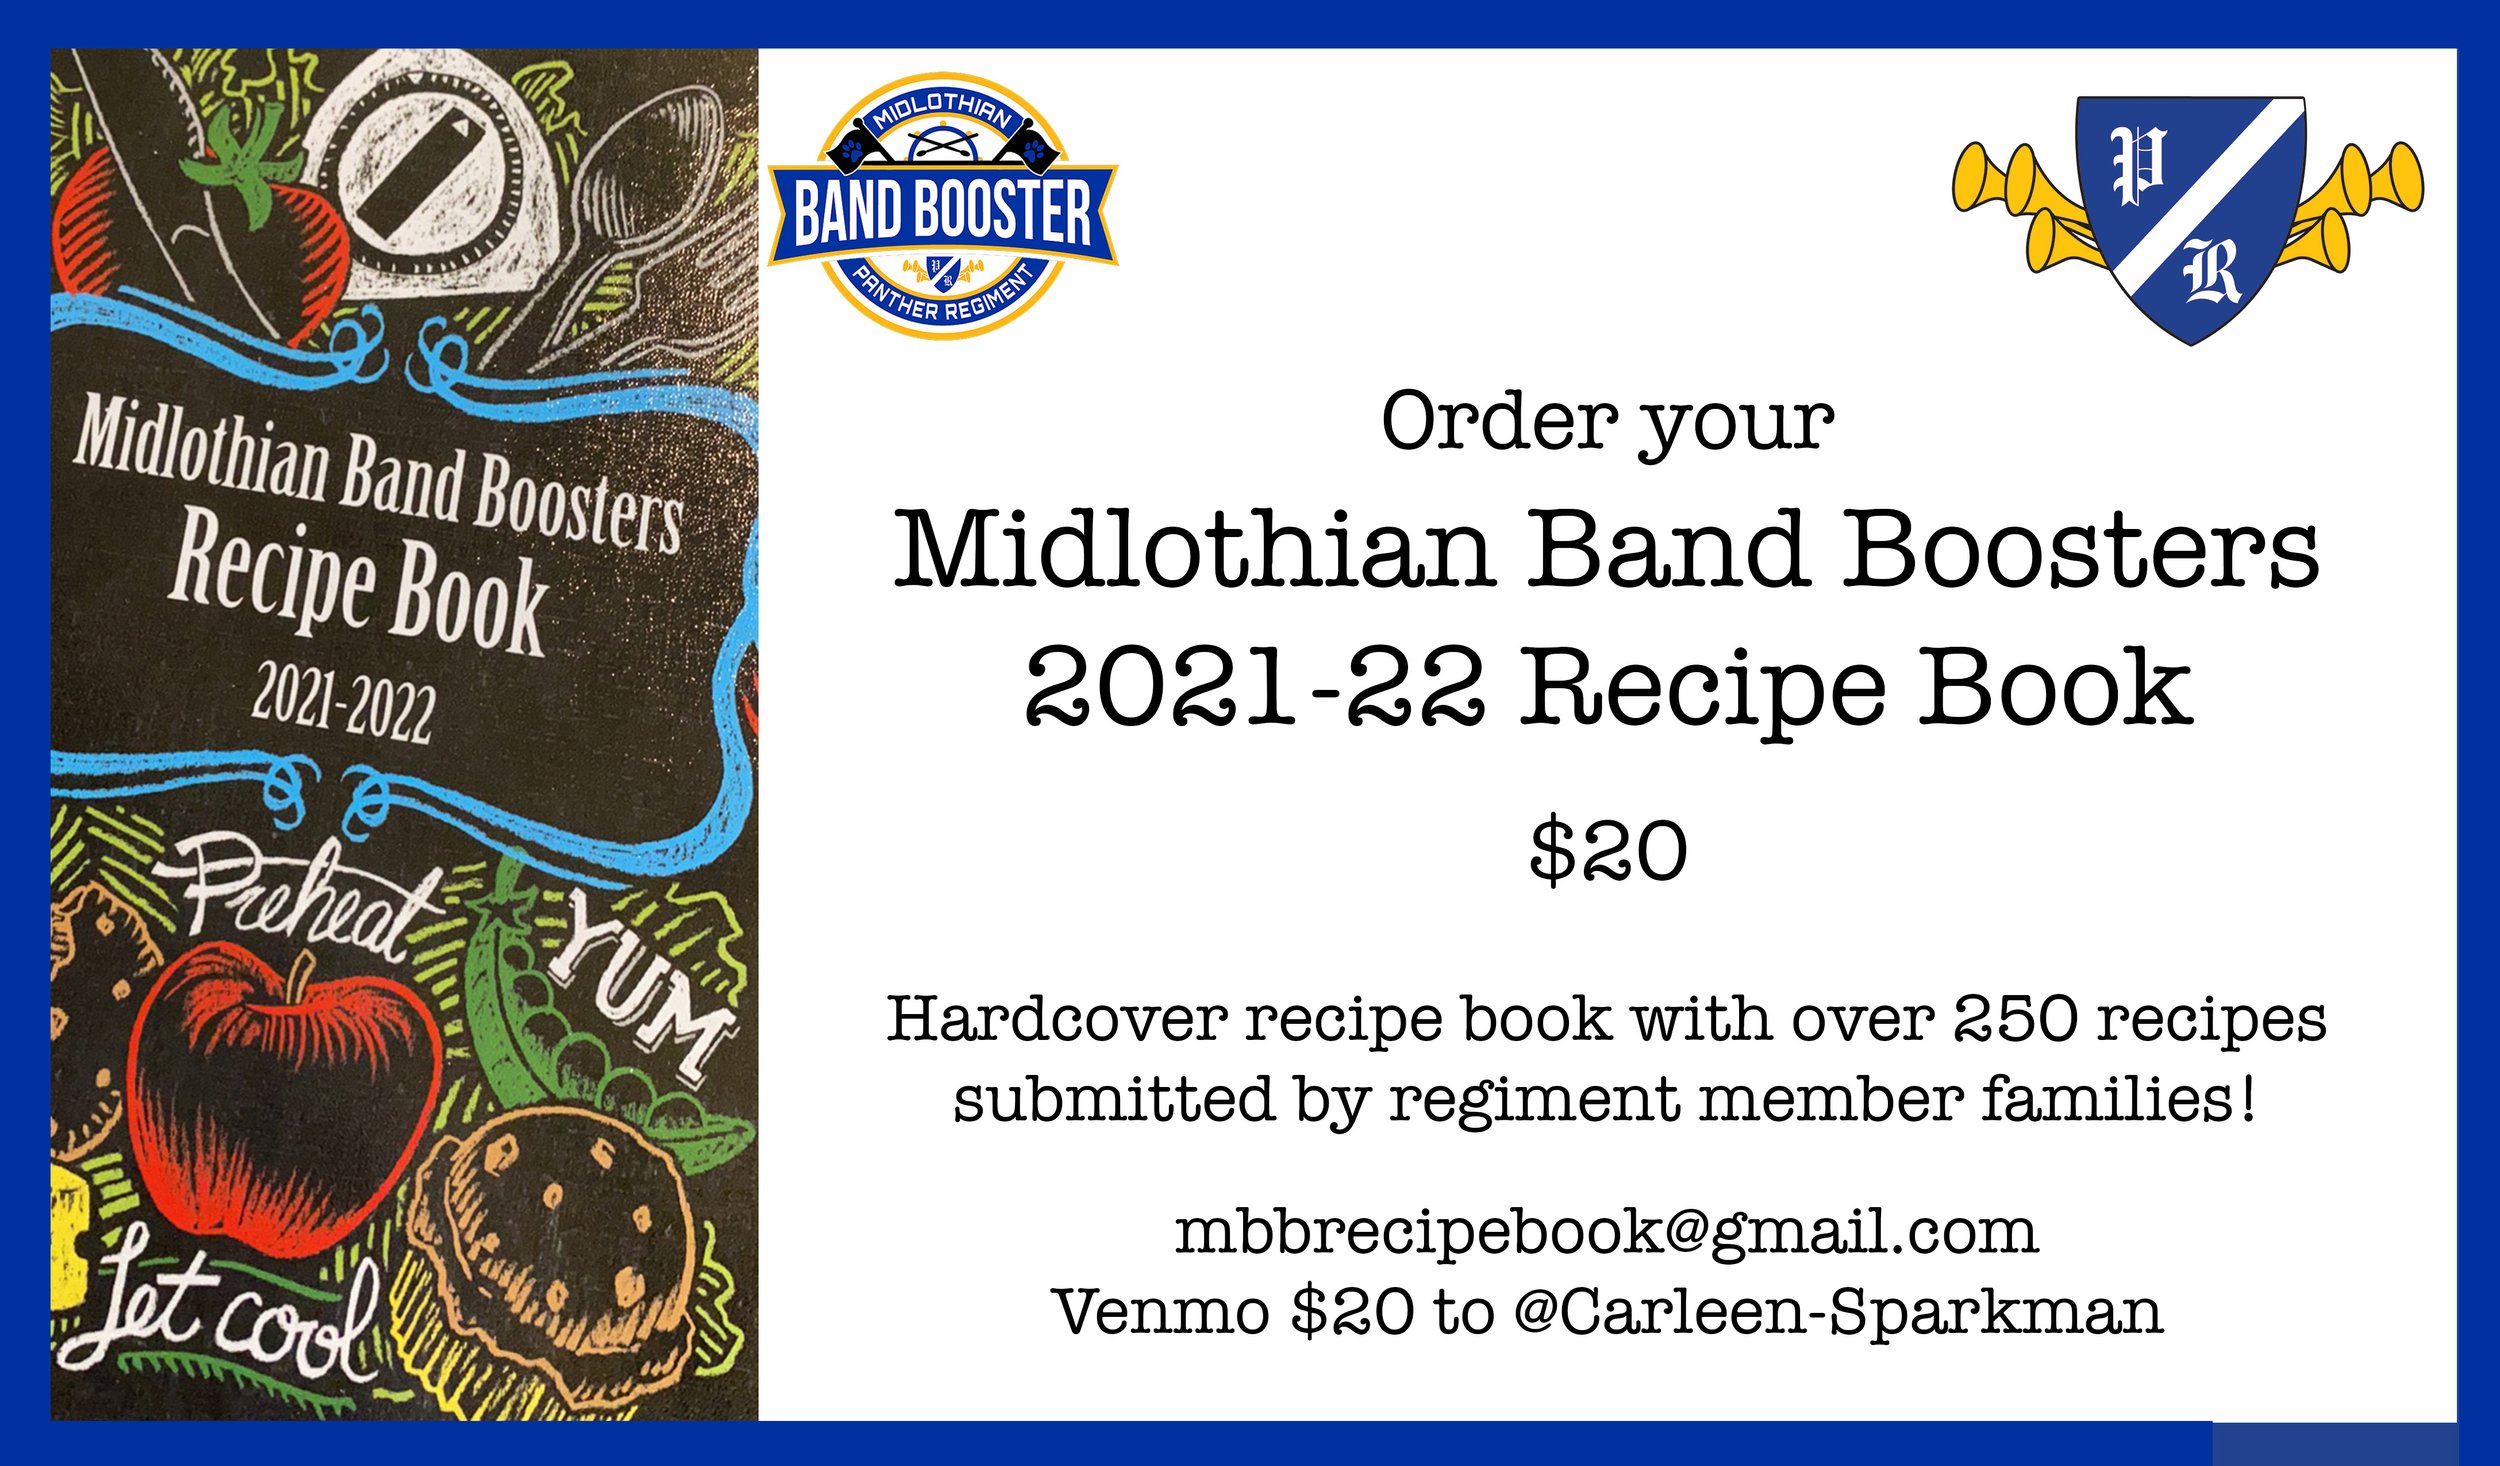 band booster recipe book ad for mhs venmo only  (1).jpg